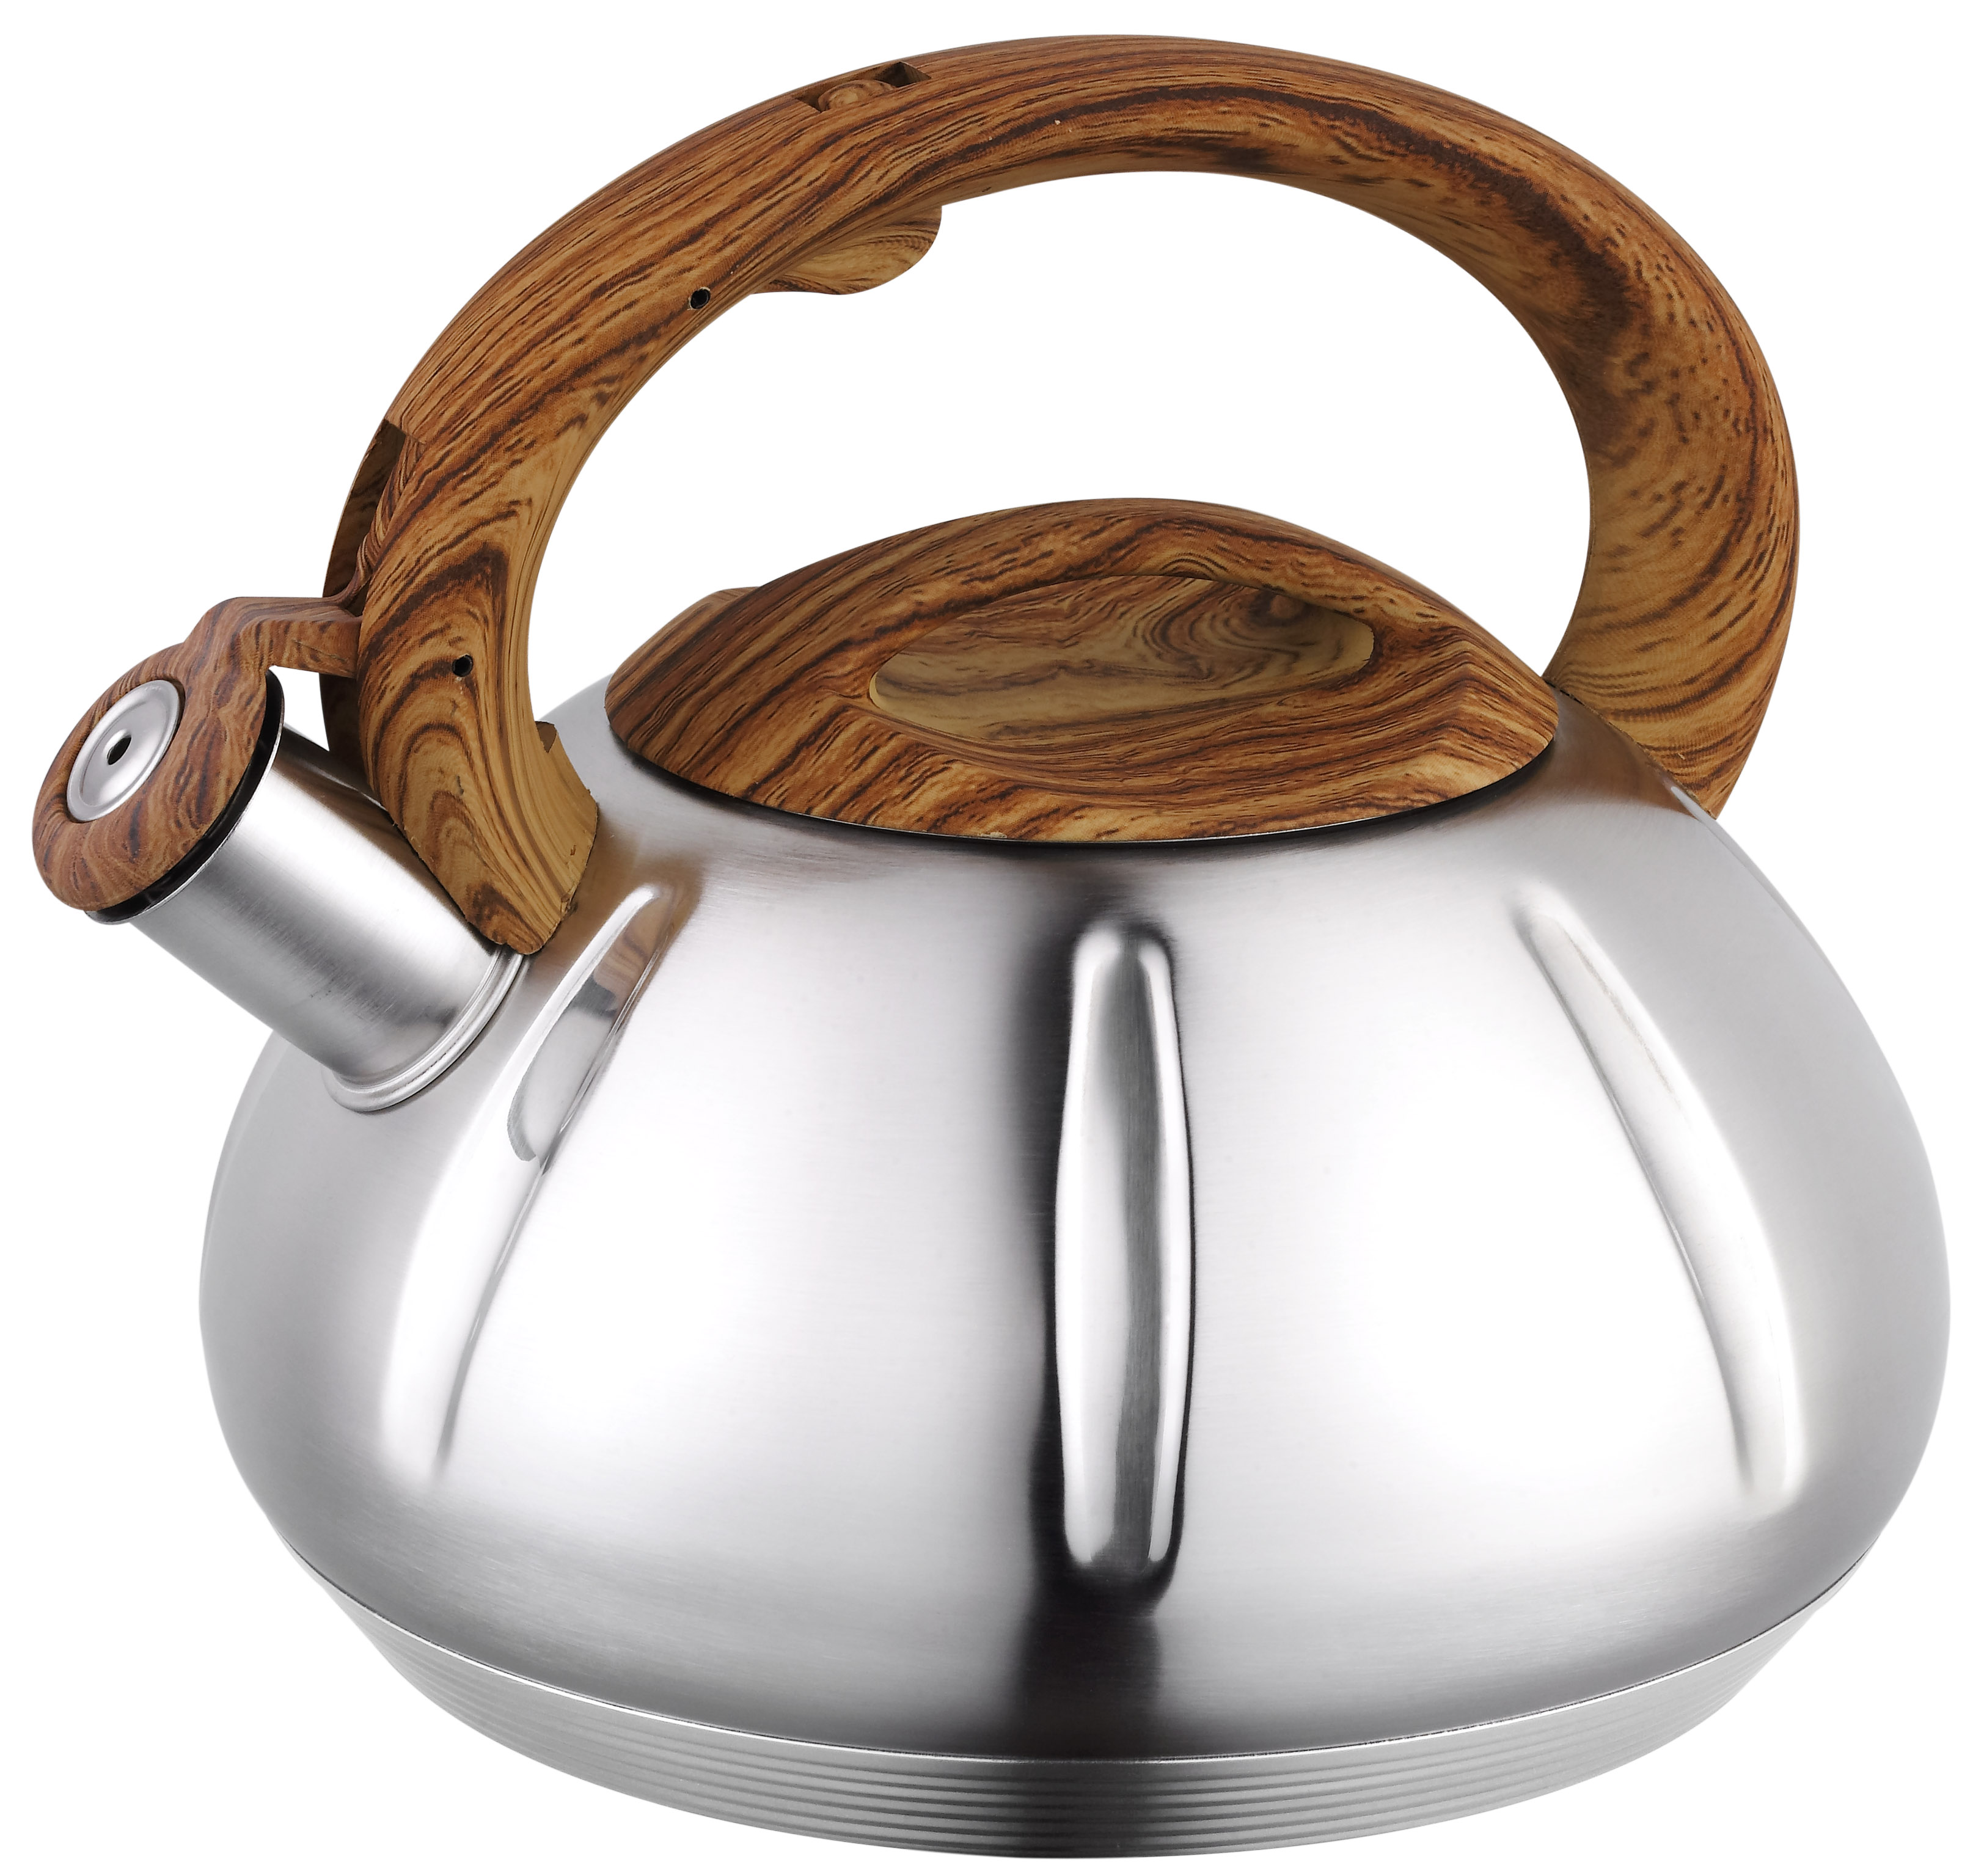 The Best Whistling Tea Kettles: A Comprehensive Guide